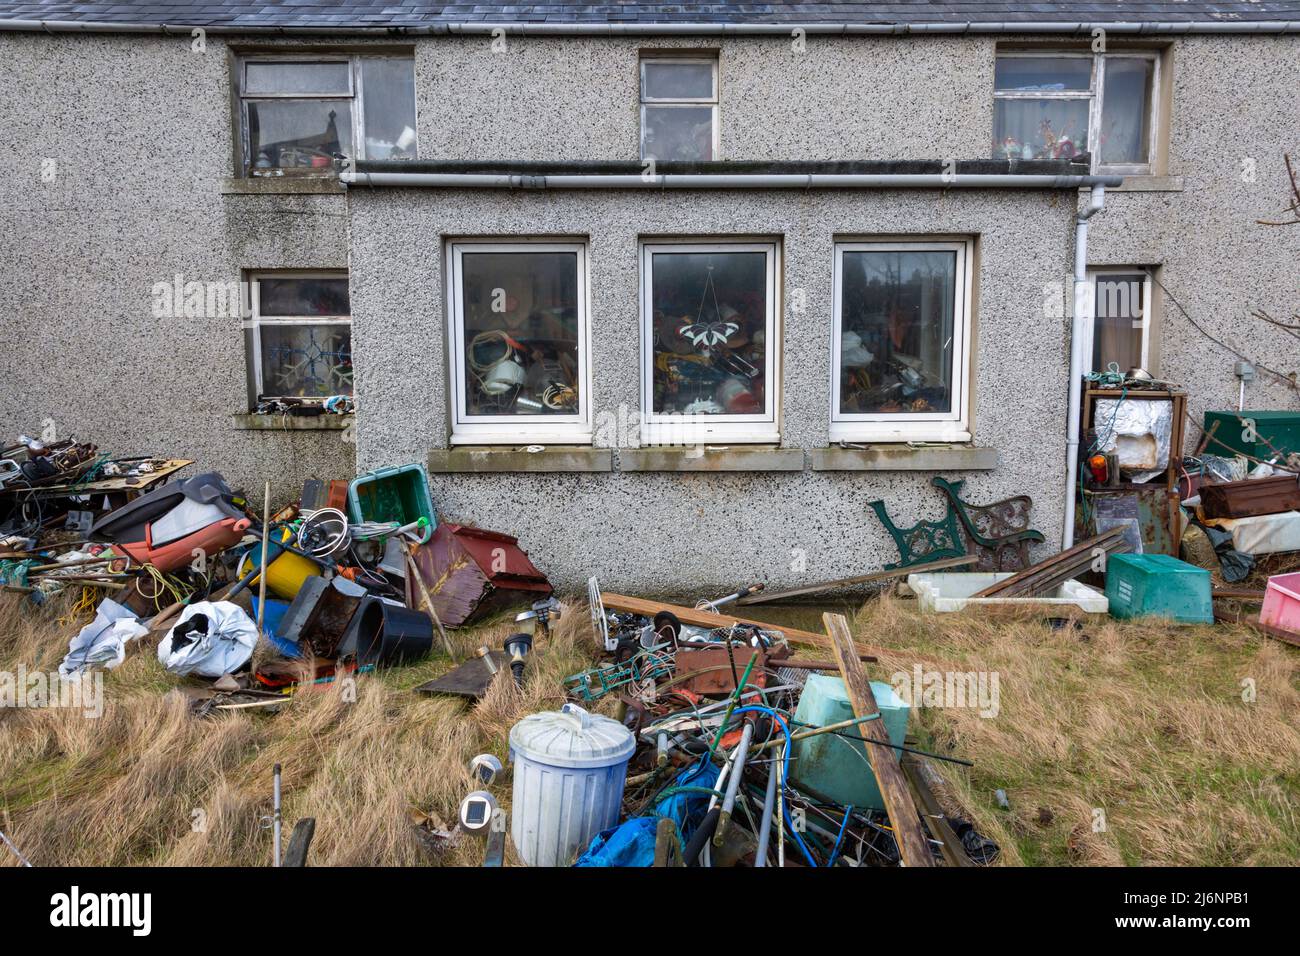 House with junk and rubbish in the garden, UK Stock Photo